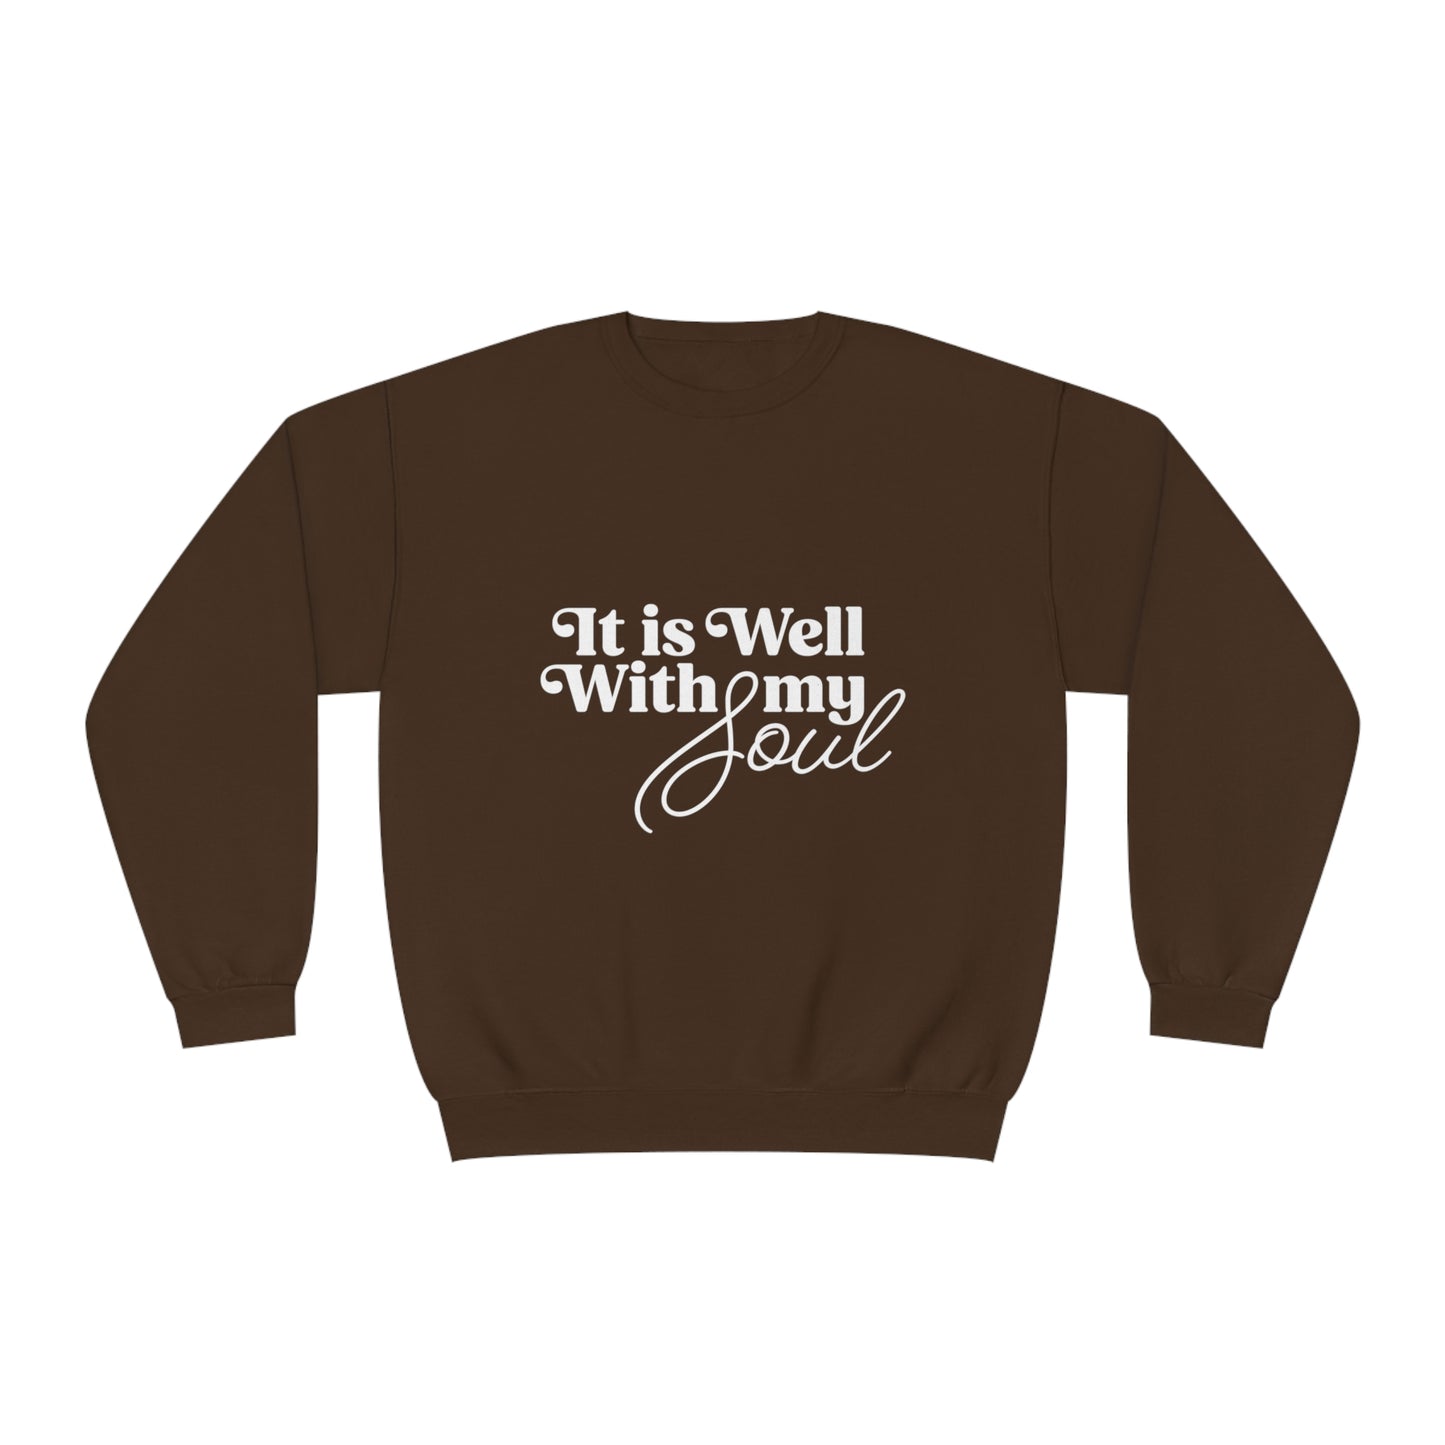 Well With my Soul Sweatshirt - A